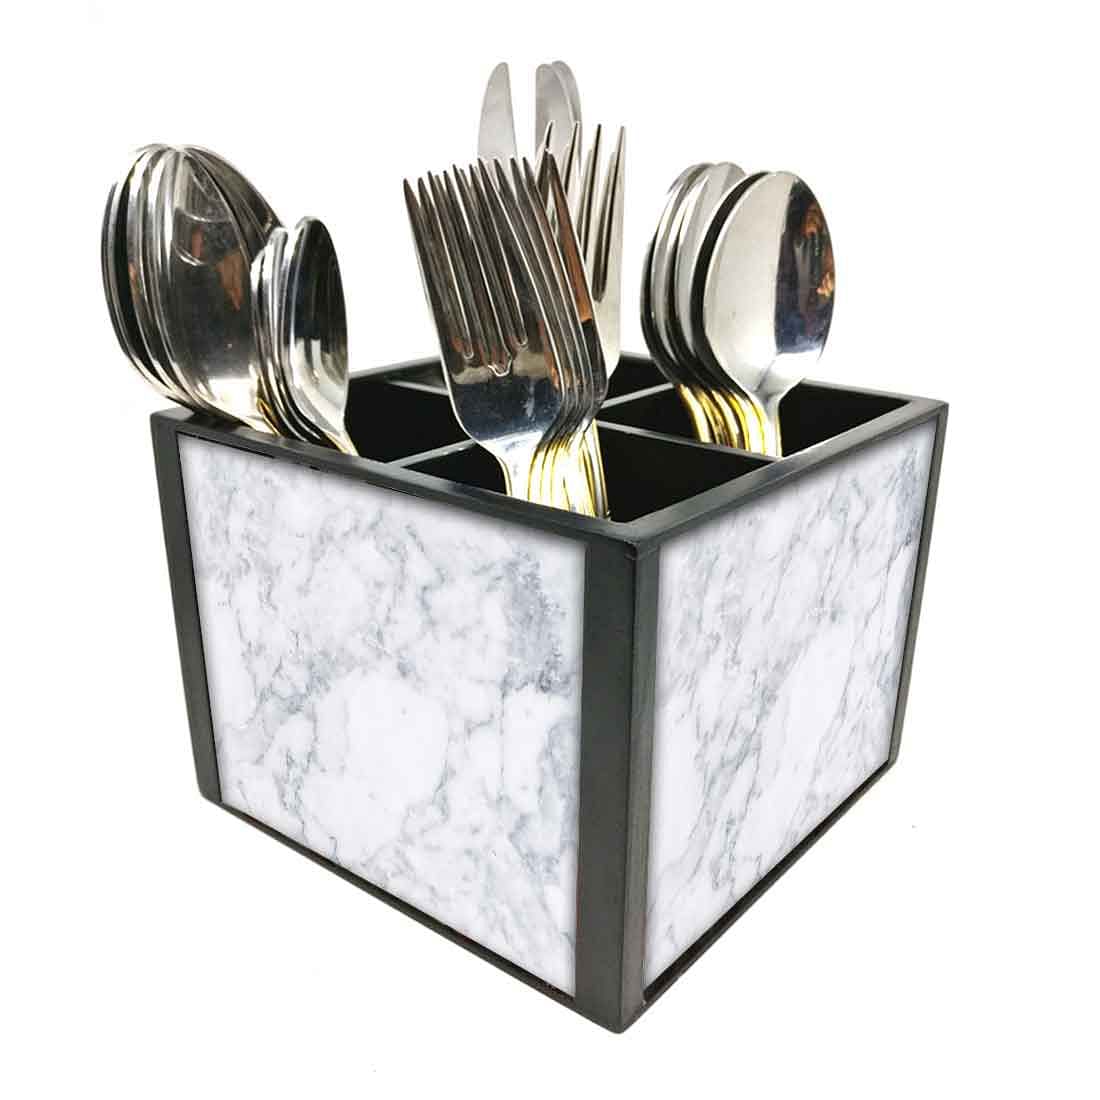 Cutlery Stand Holder for Dining Table Organizer - White Marble Nutcase